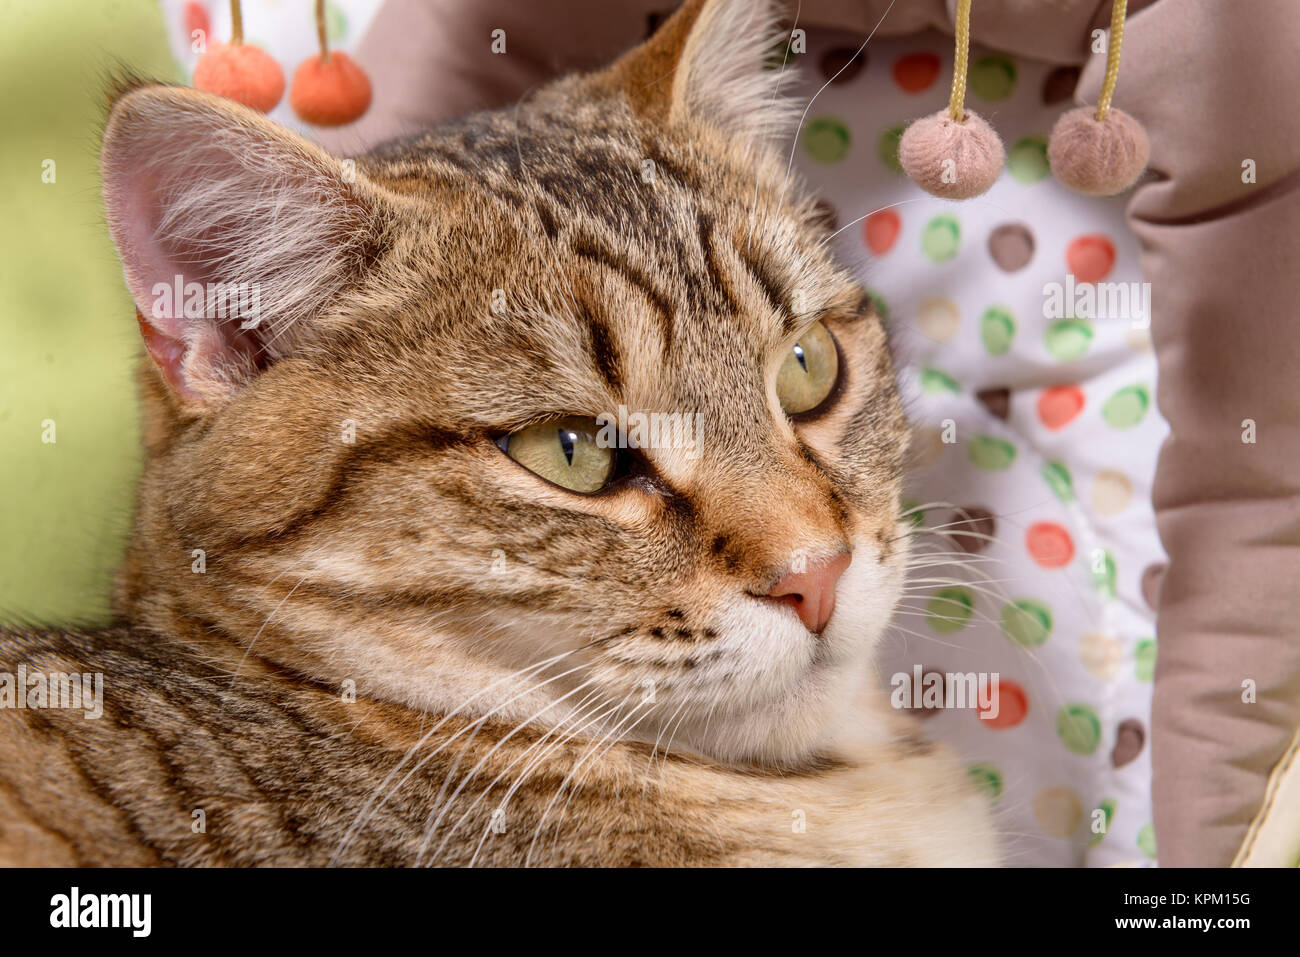 close up on the head of a cat Stock Photo